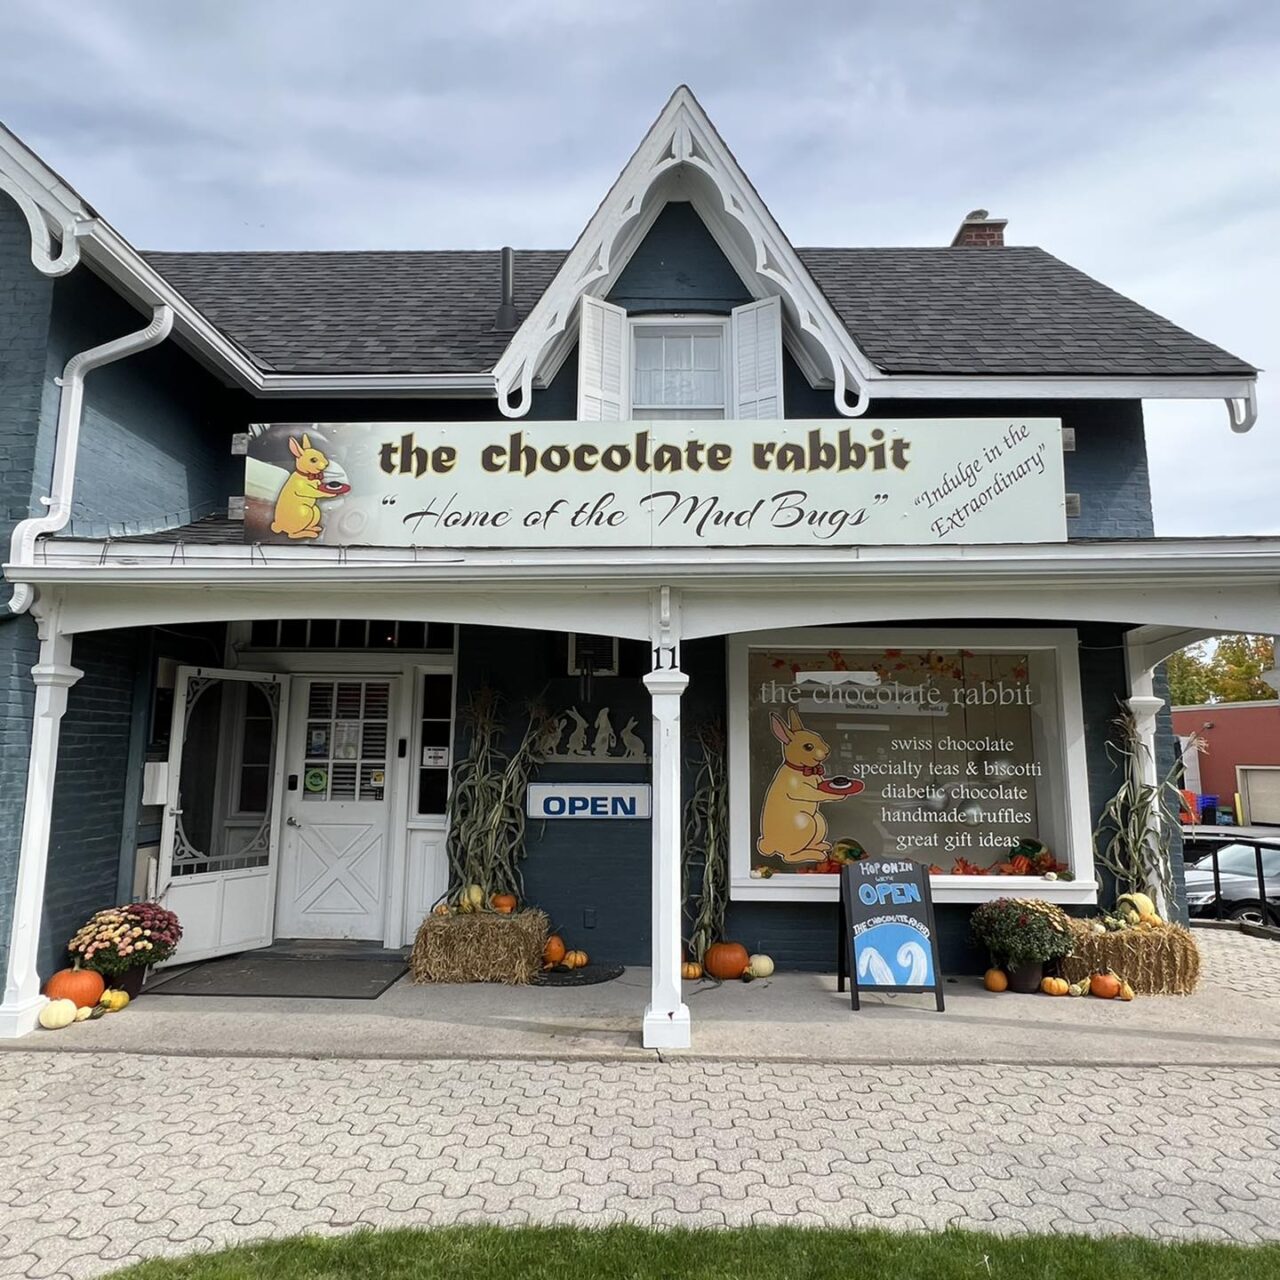 Looking towards entrance for The Chocolate Rabbit with fall decor